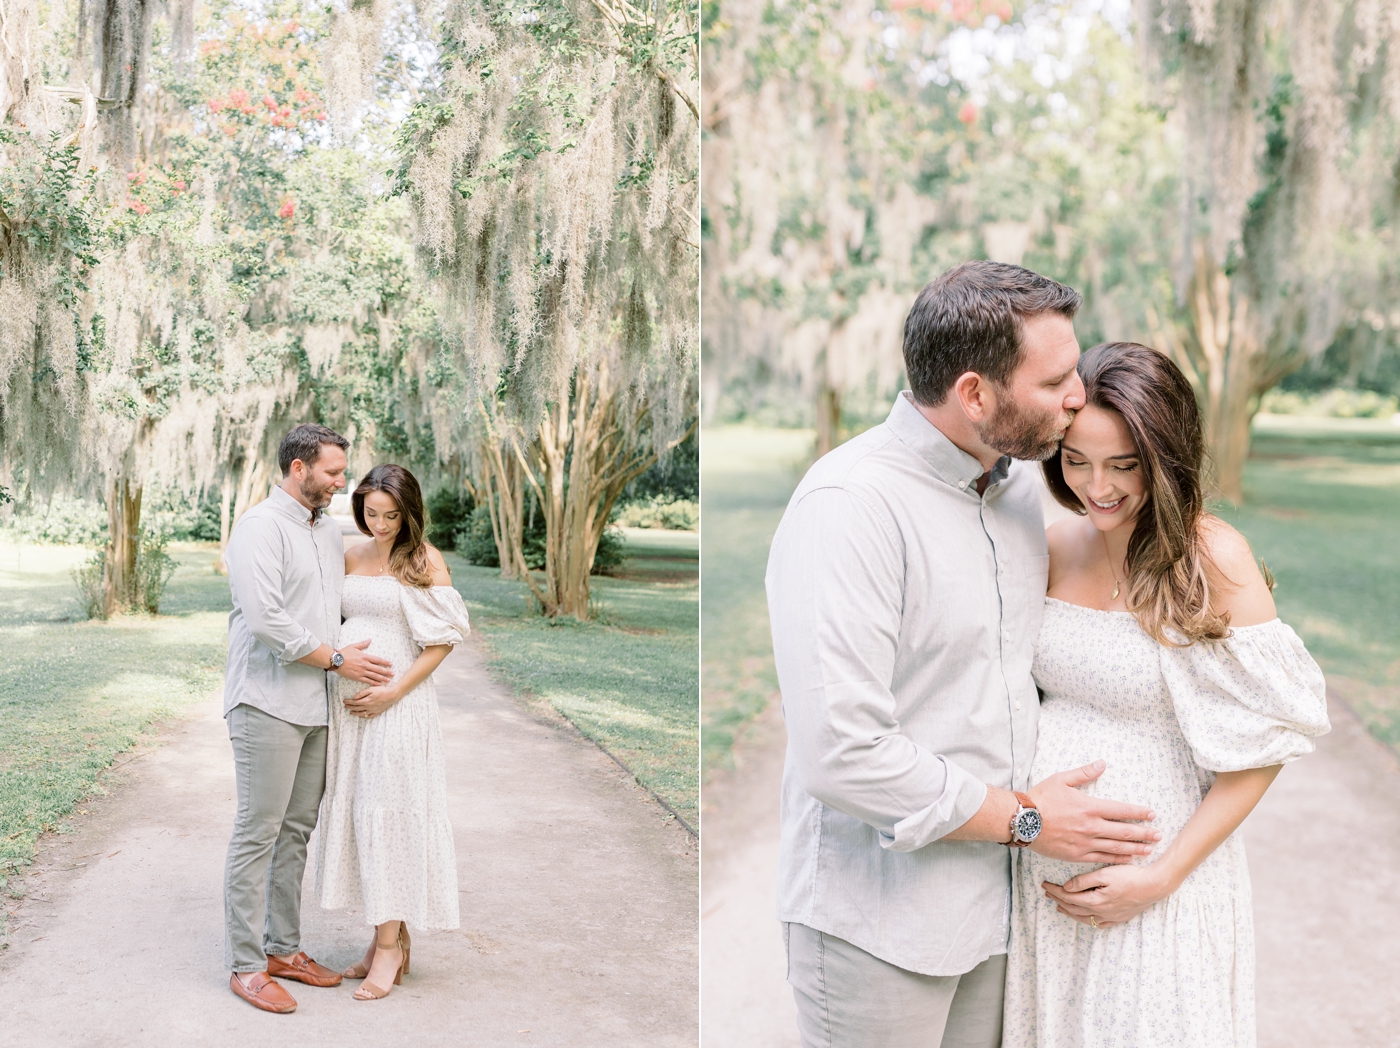 Dad to be cradling moms belly | Photo by Caitlyn Motycka Photography.